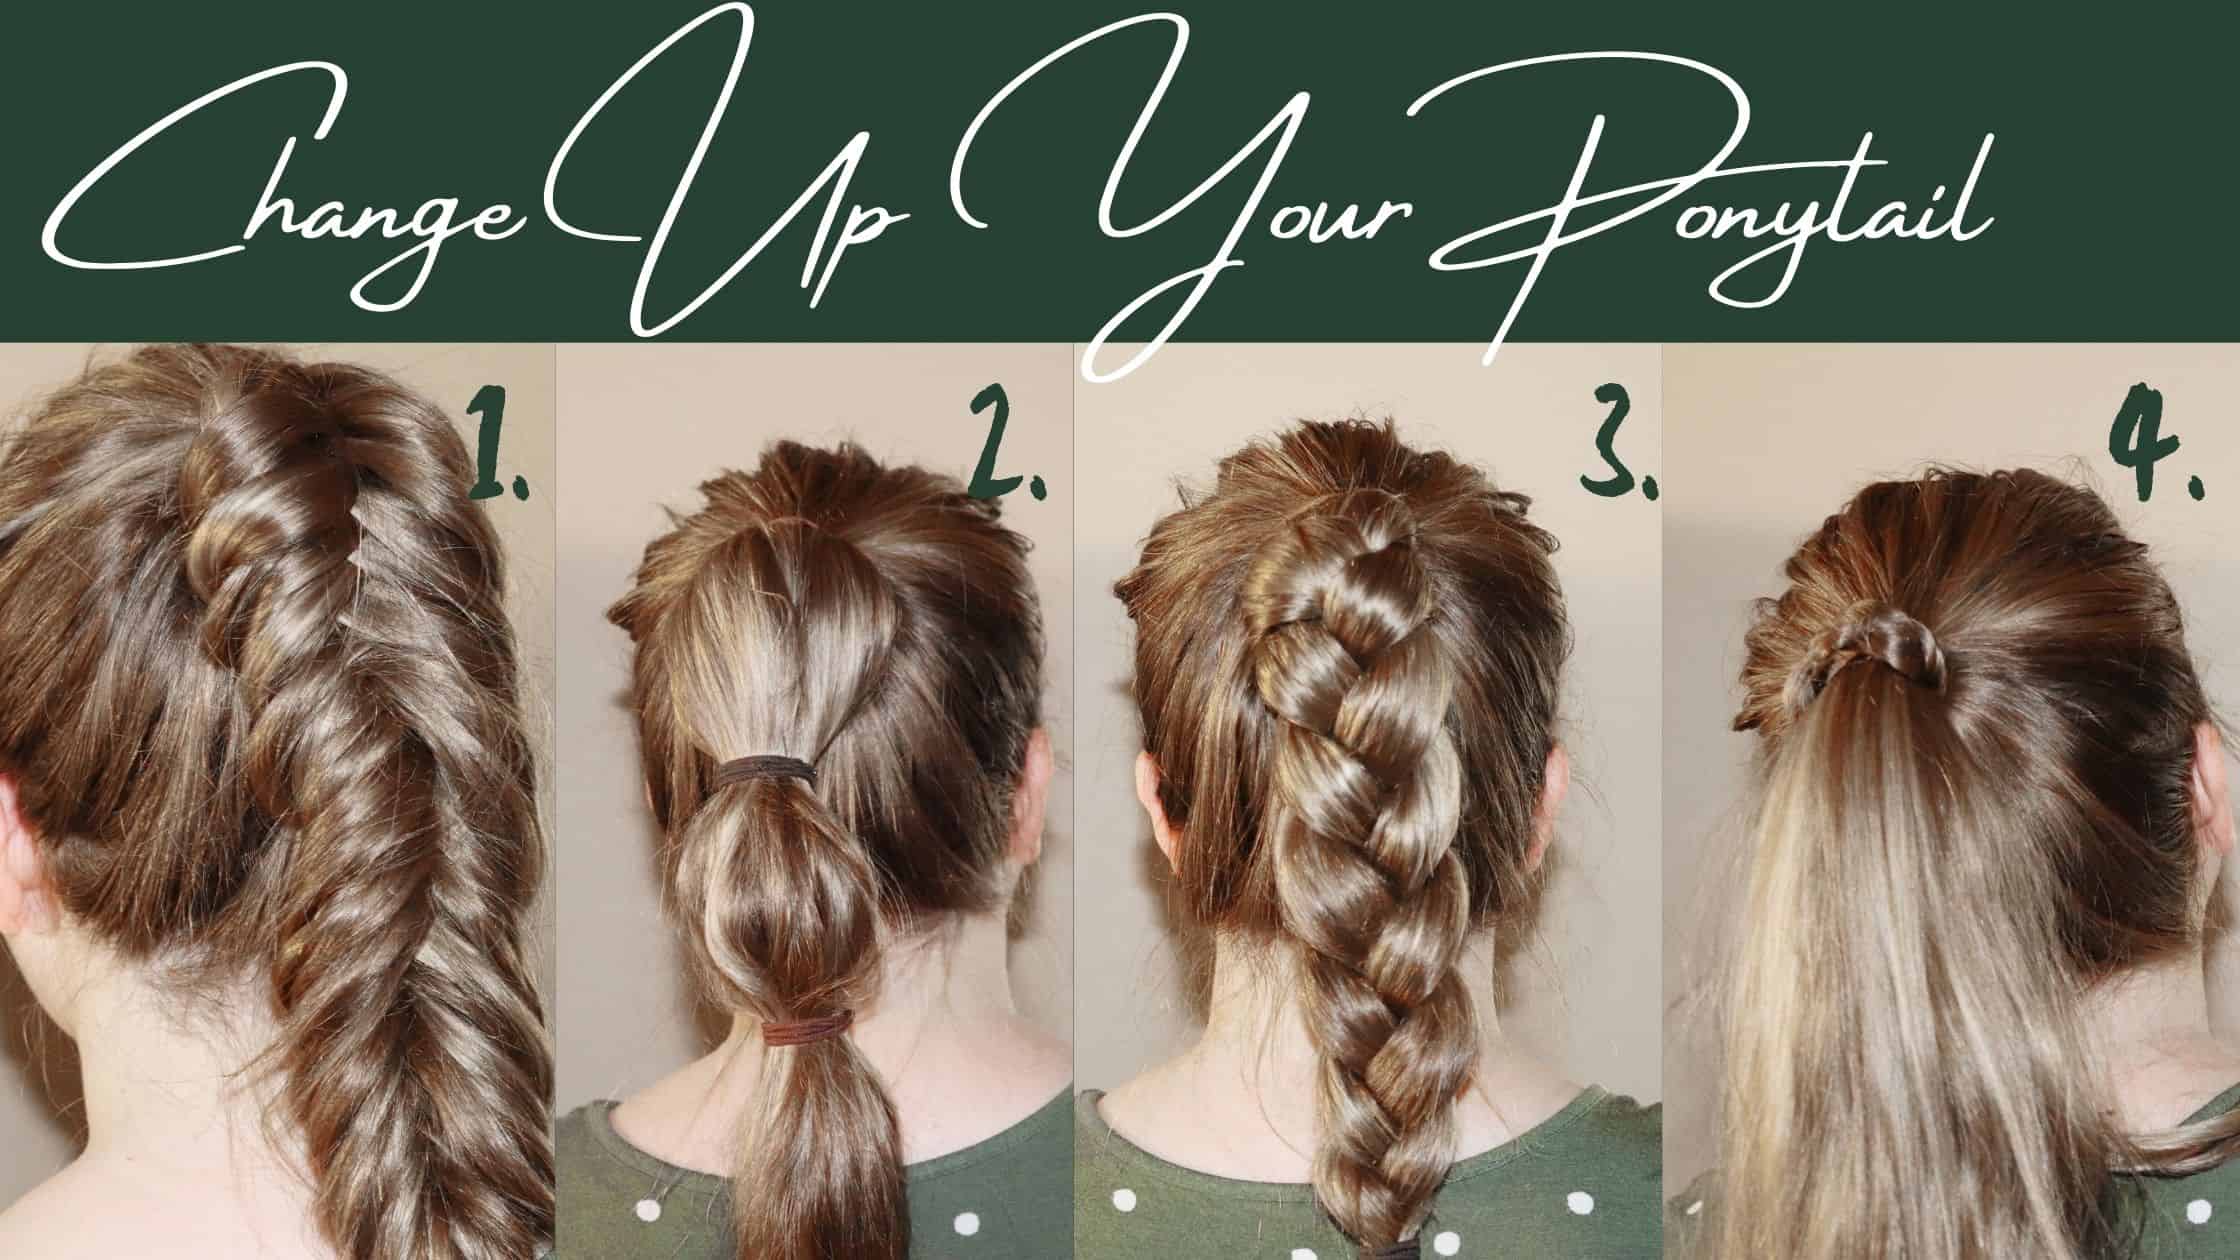 4 Easy ways to change up your ponytail - She's Your Friend